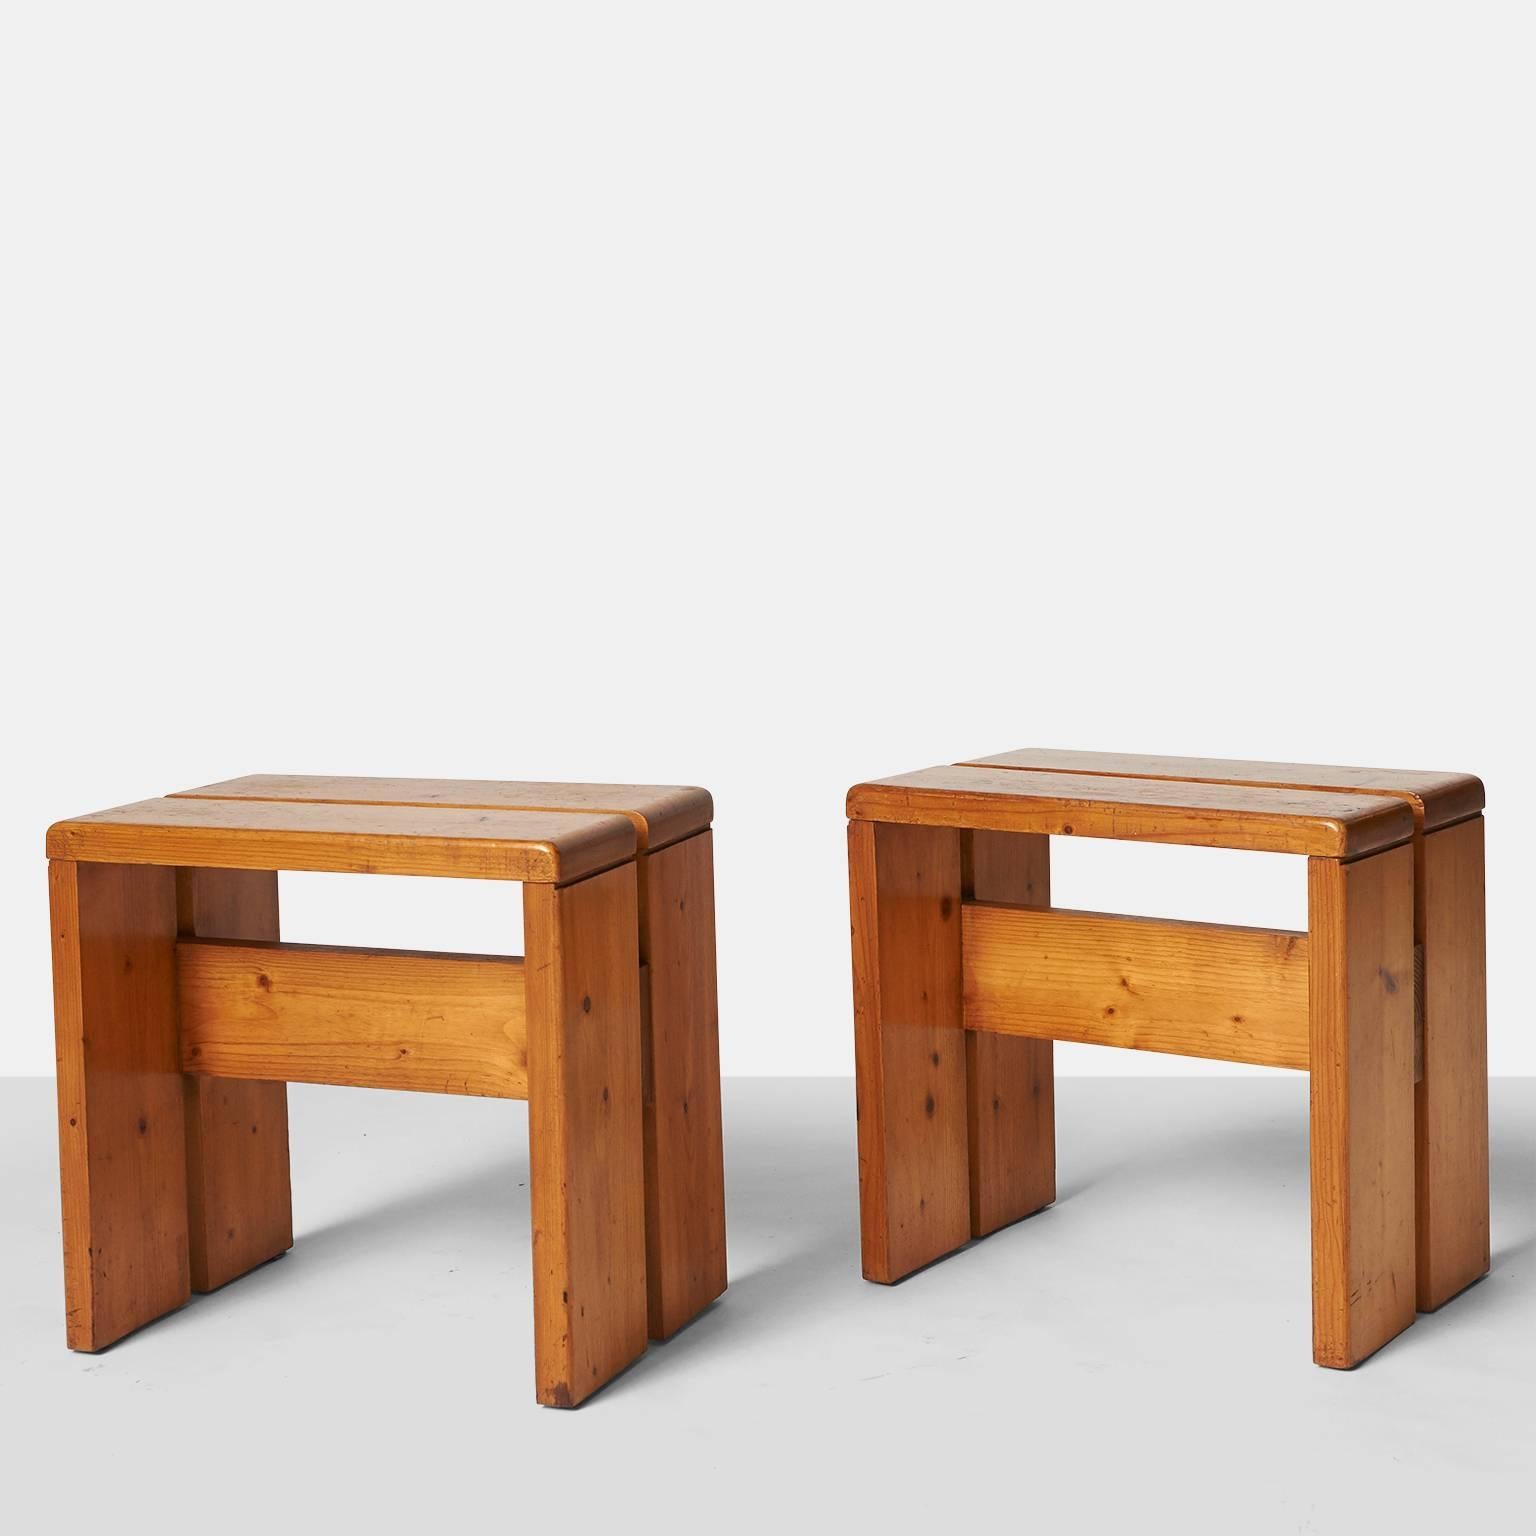 A pair of rectangular stools in pine by Charlotte Perriand. The stools were designed for the Arc 1600 ski resort in Les Arcs (1967-1969), built by a team of architects, including Perriand. The finish is naturally aged pine.
France, circa 1960s.